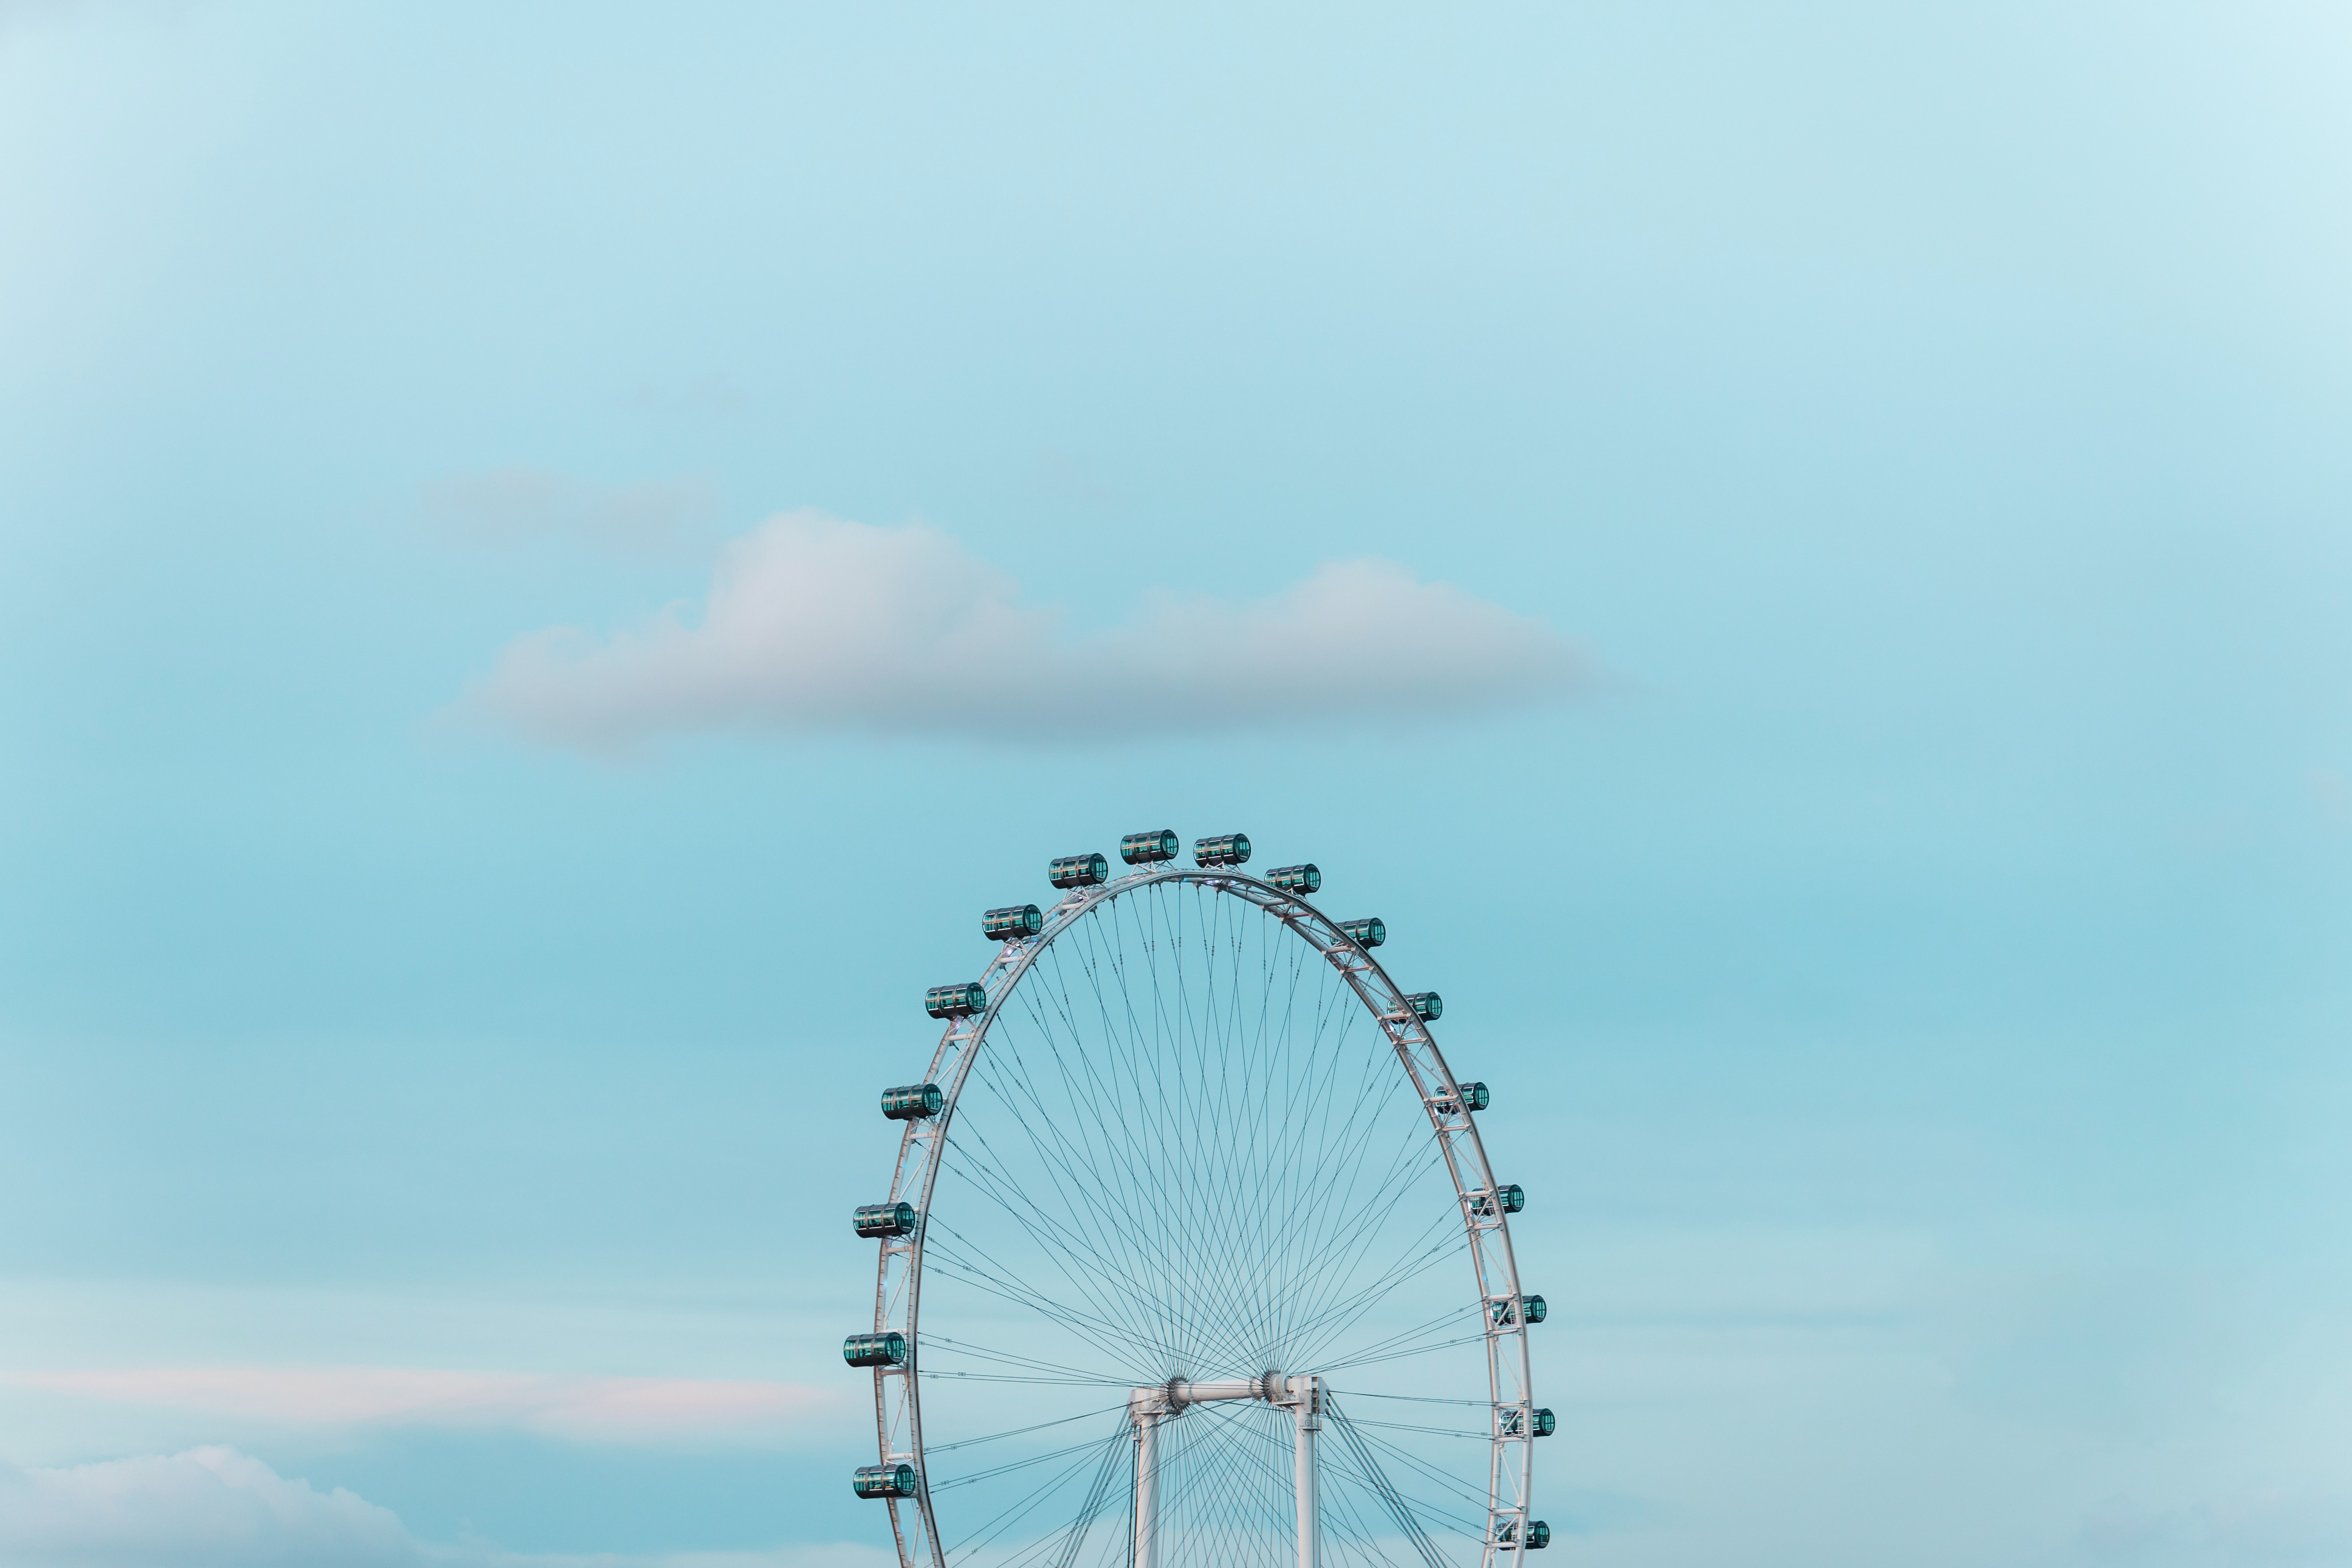 sky, miscellanea, miscellaneous, ferris wheel, attraction, booths, stall